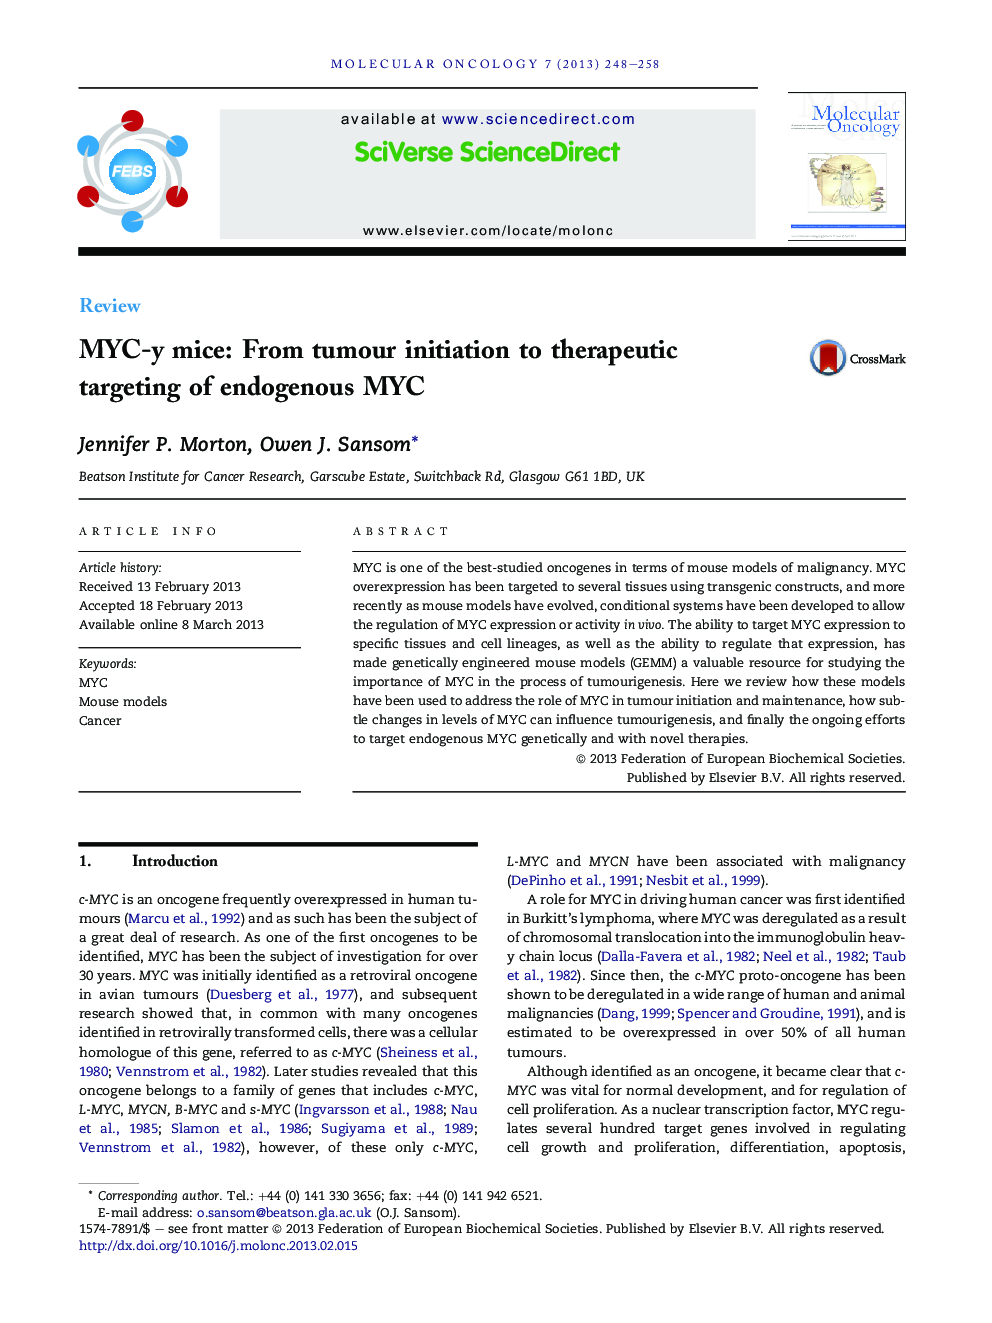 MYC-y mice: From tumour initiation to therapeutic targeting of endogenous MYC